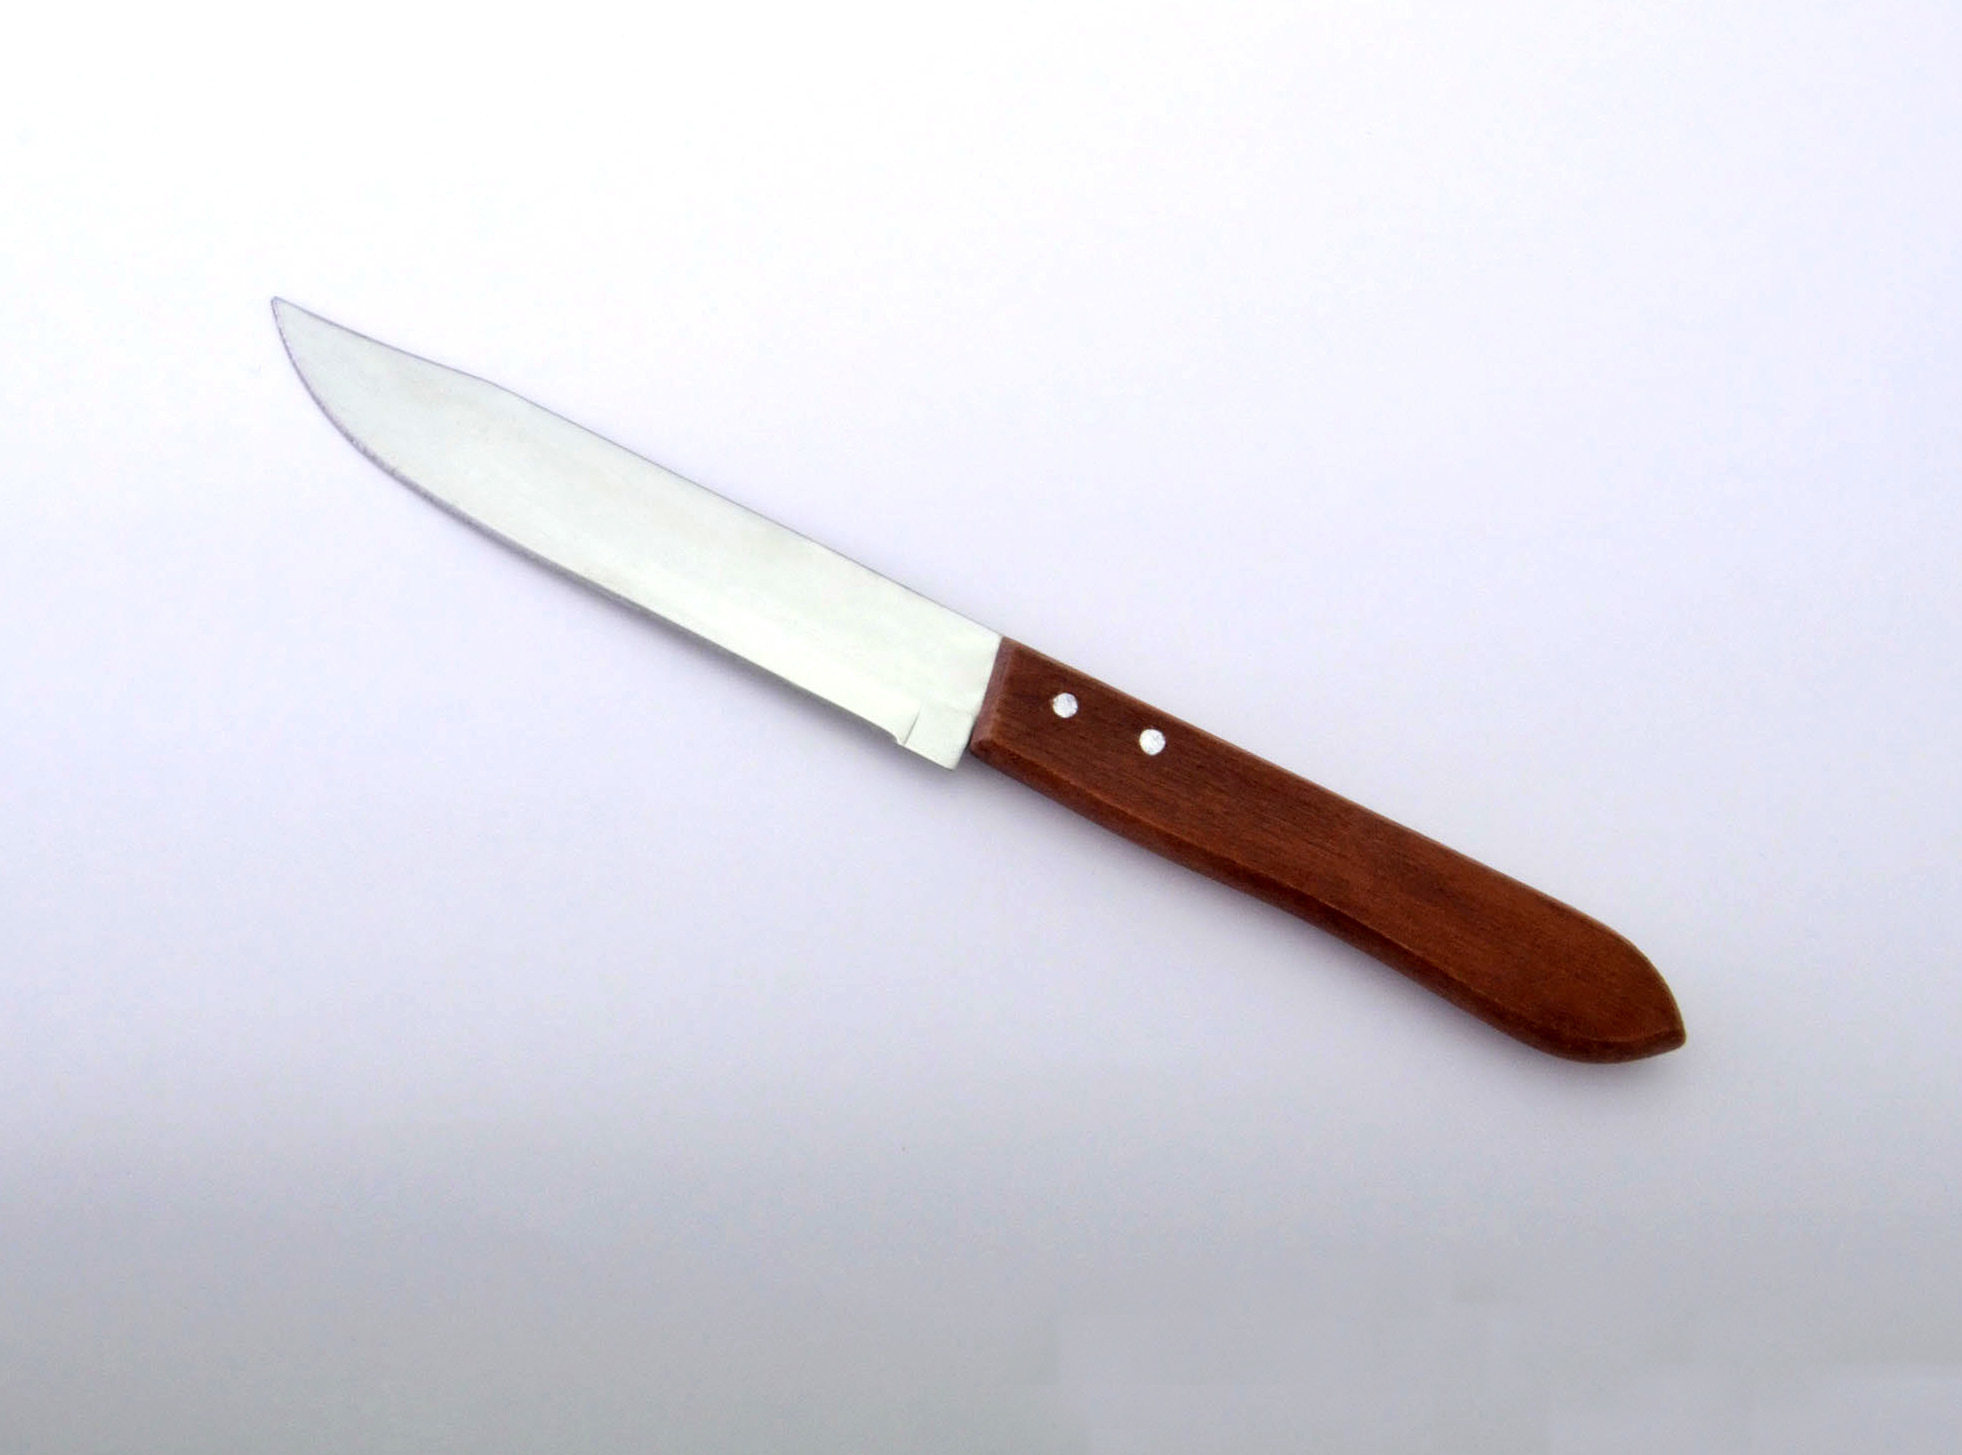 Customized Fashion The Latest Design High Quality Stainless Steel Kitchen Fruit Knife